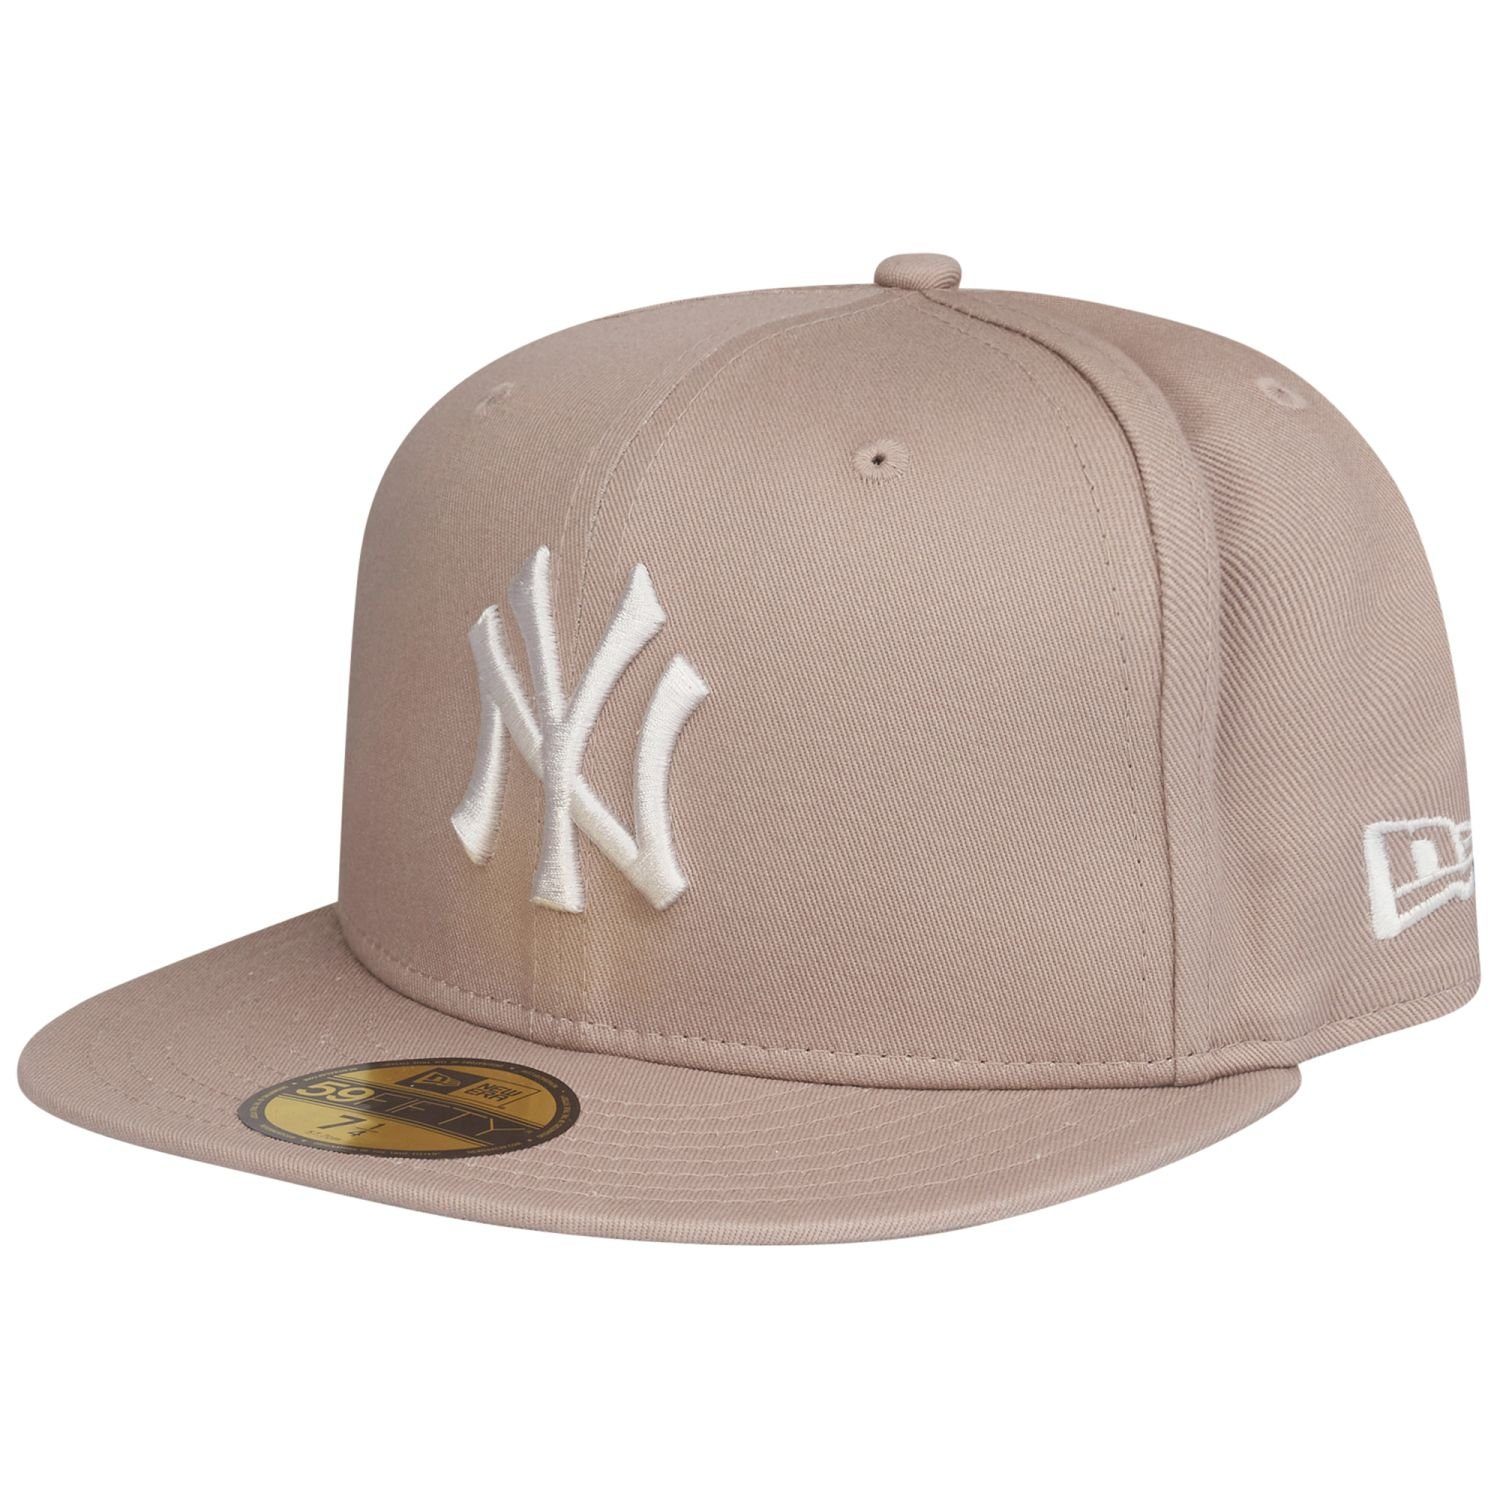 brown New Fitted York Cap Yankees ash 59Fifty New Era